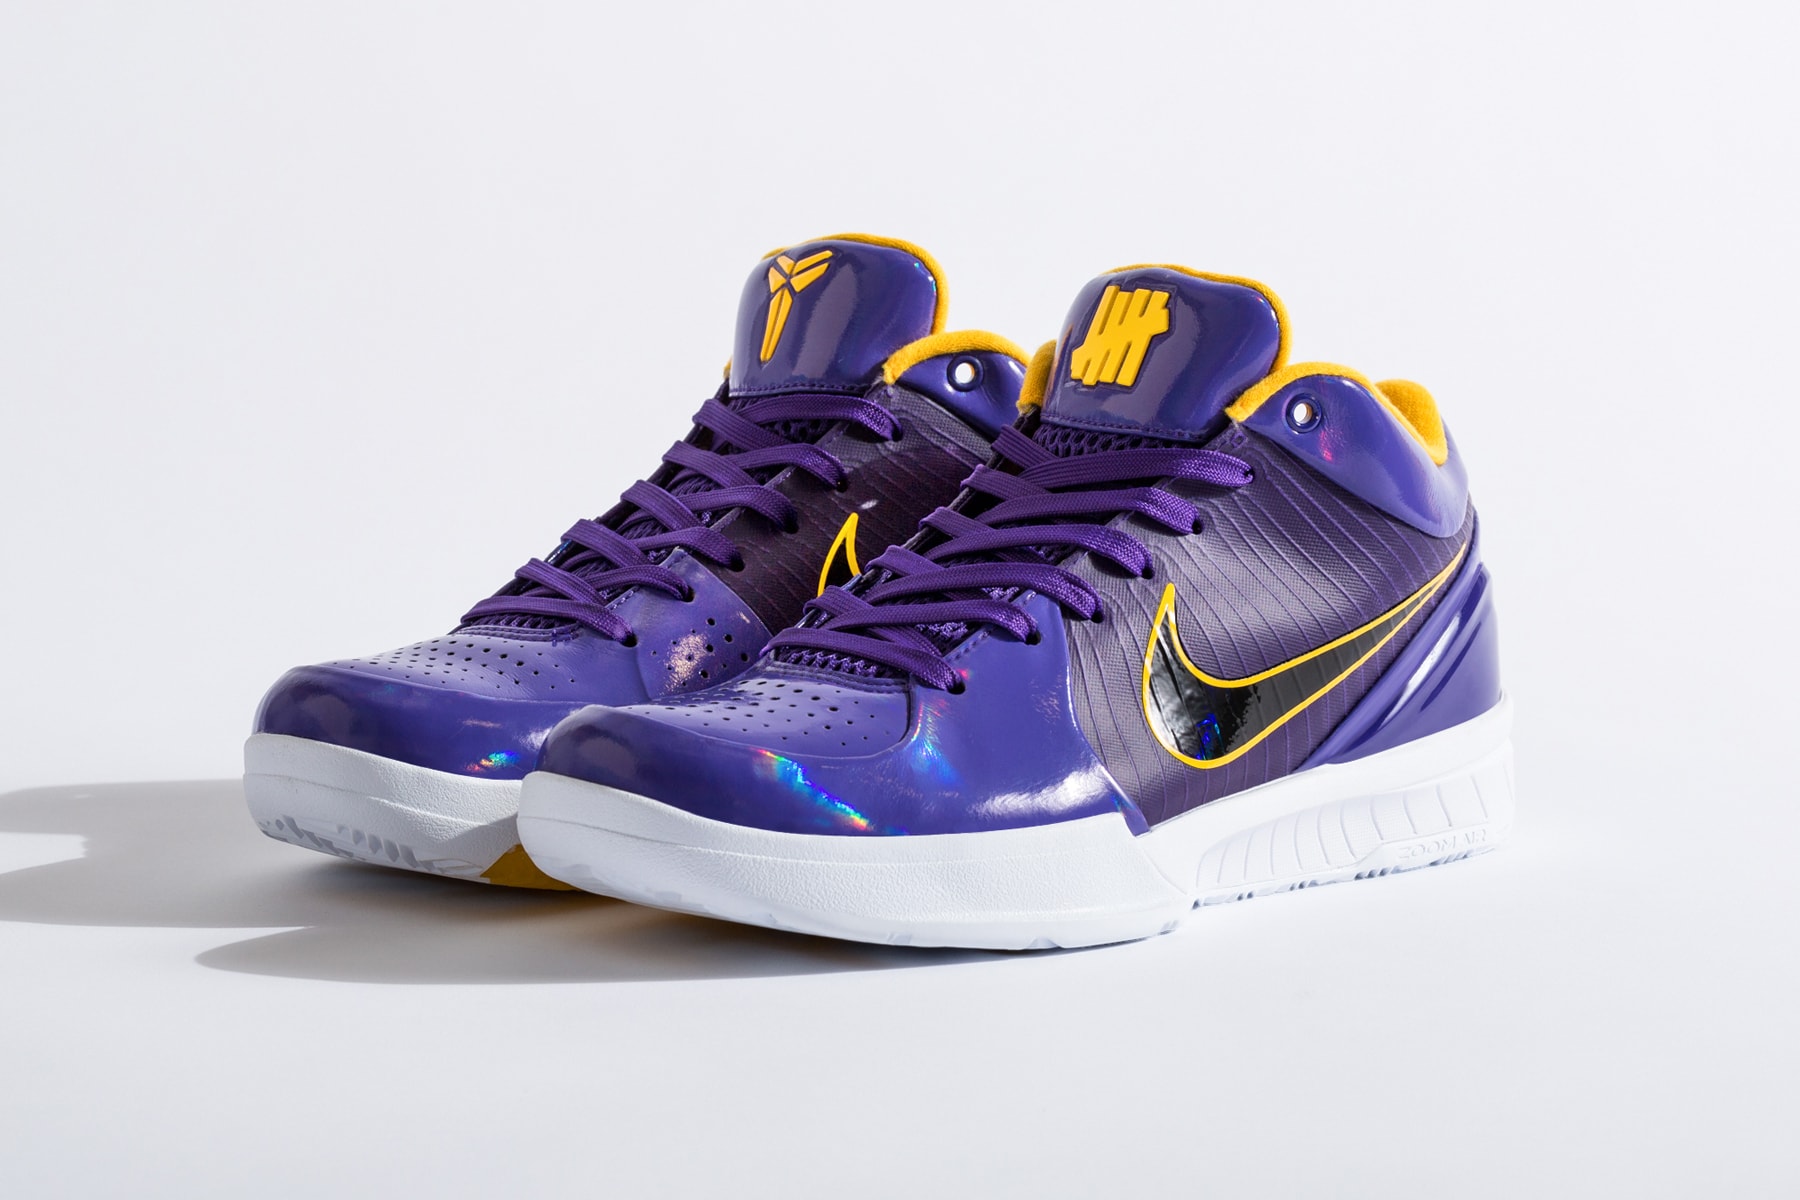 UNDEFEATED on X: Nike x Kobe Bryant Limited Edition Retirement